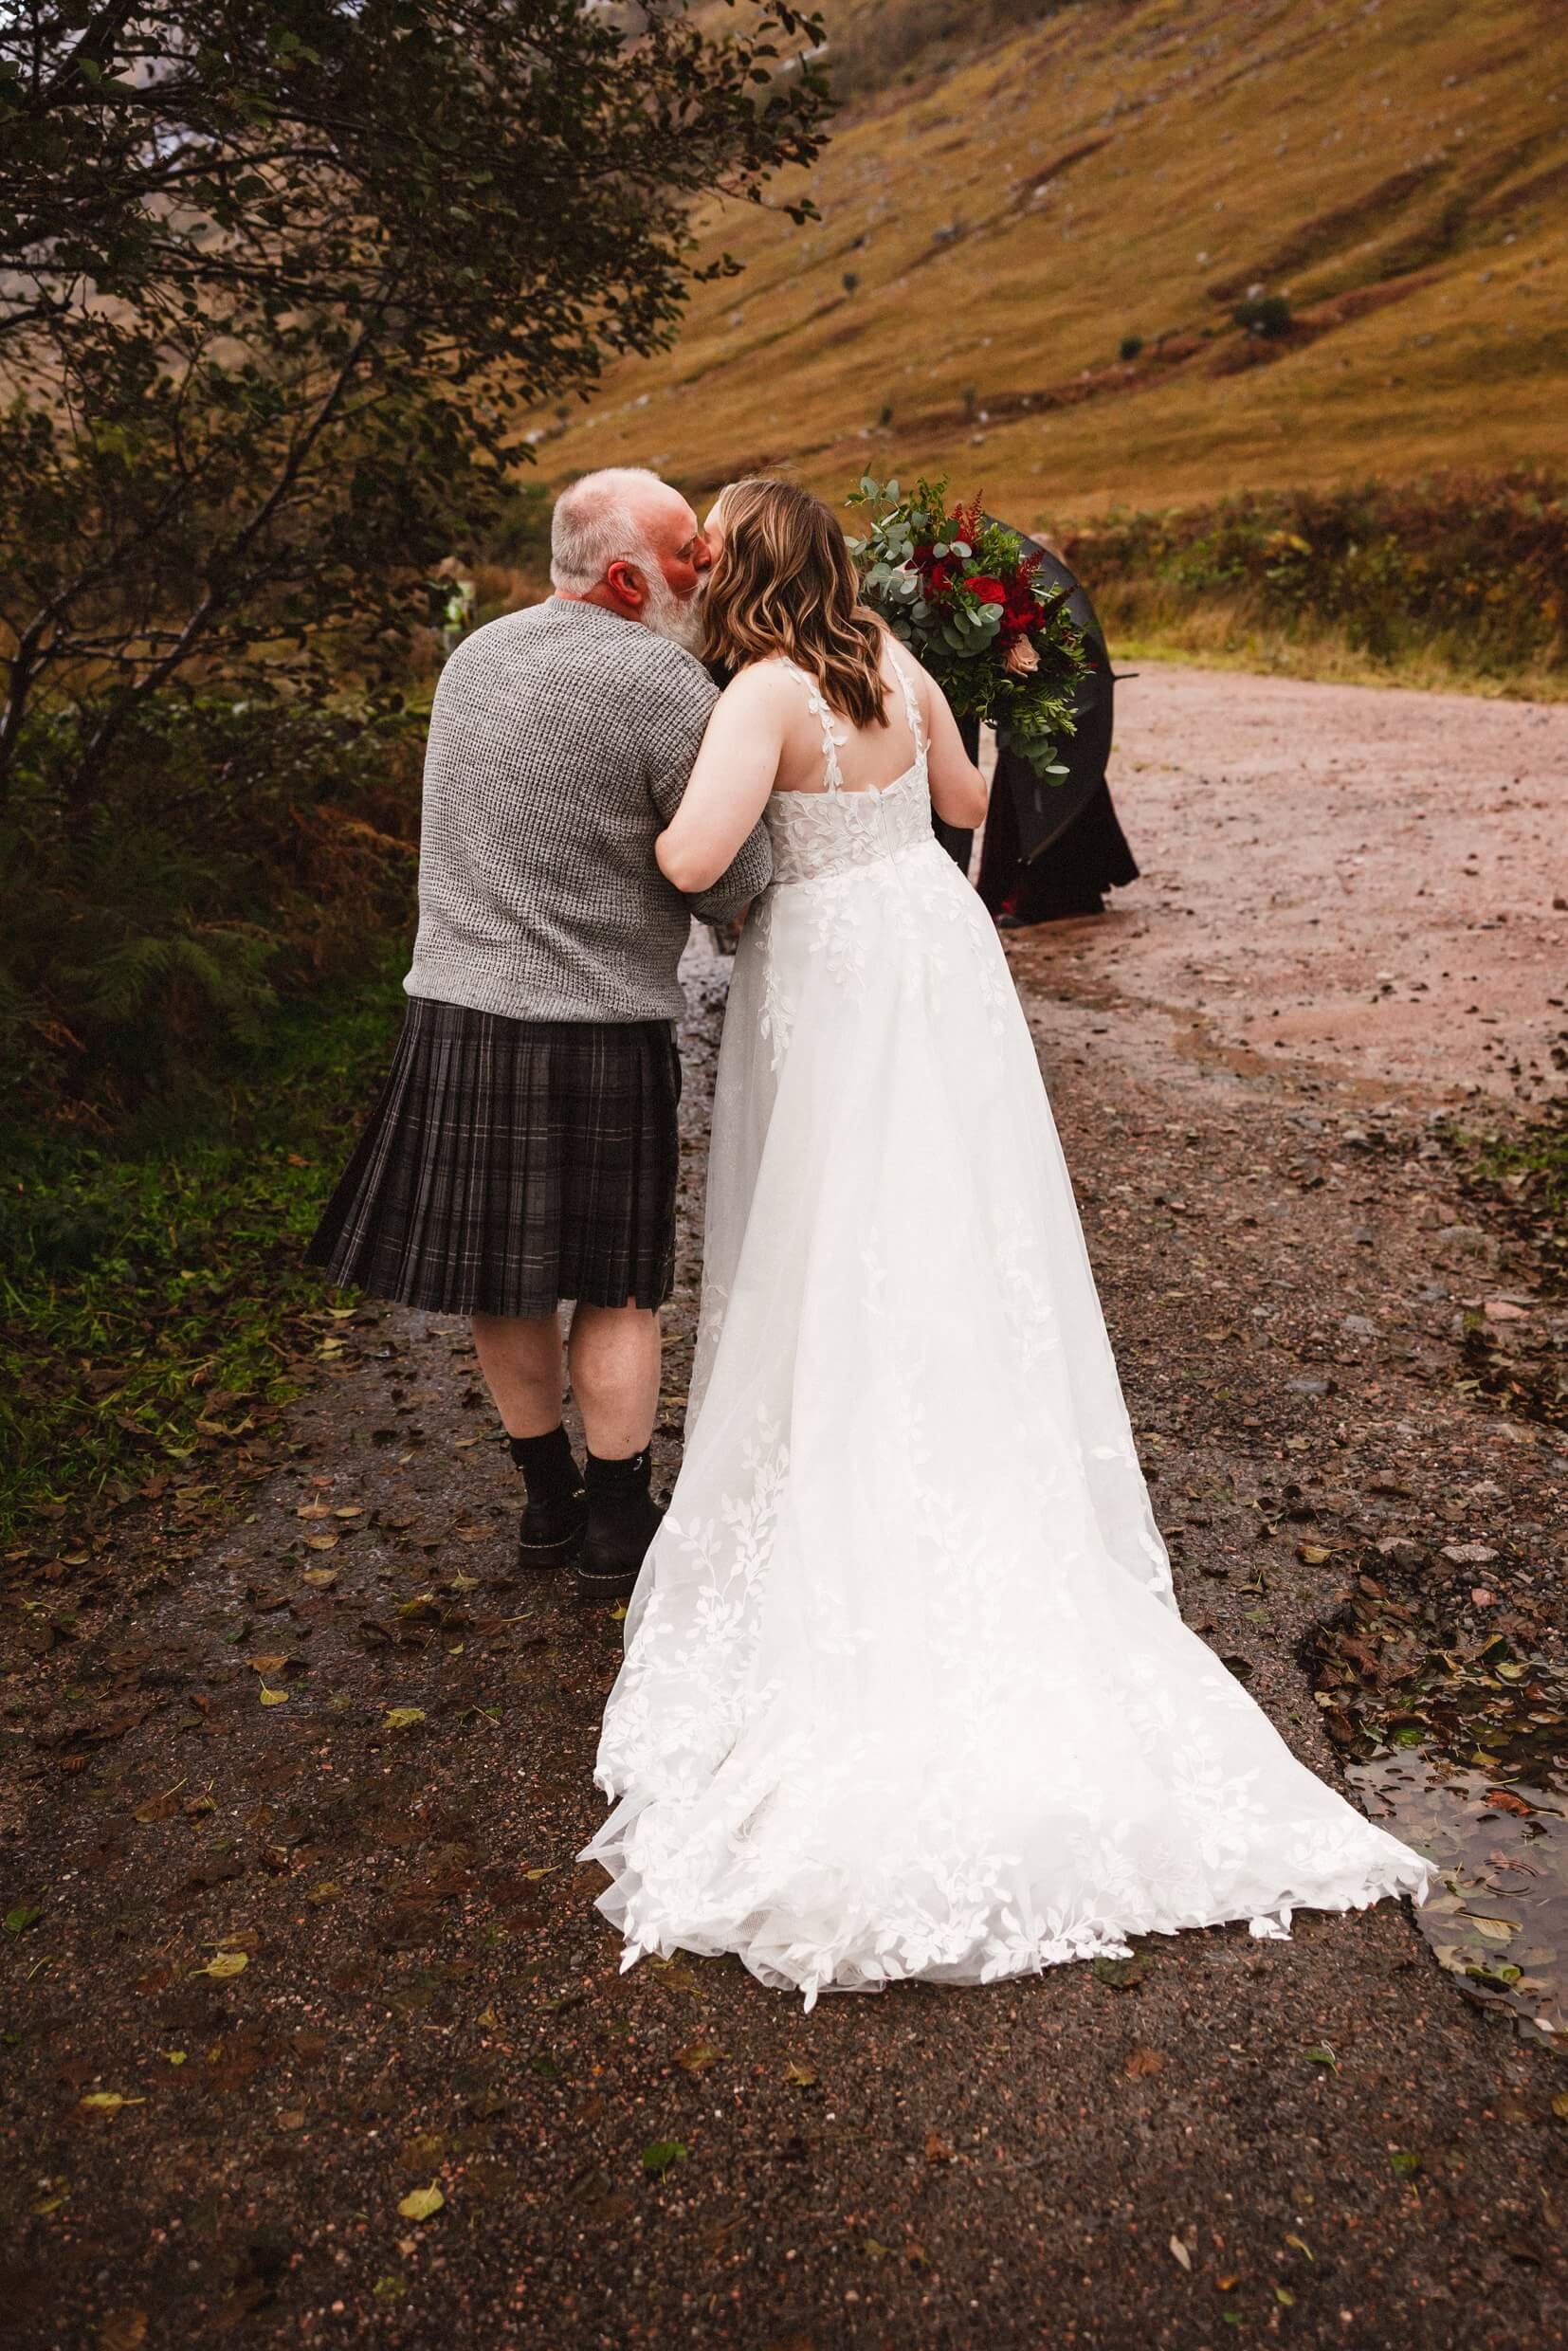 father of the bride gives daughter a kiss before glencoe elopement wedding ceremony in scotland